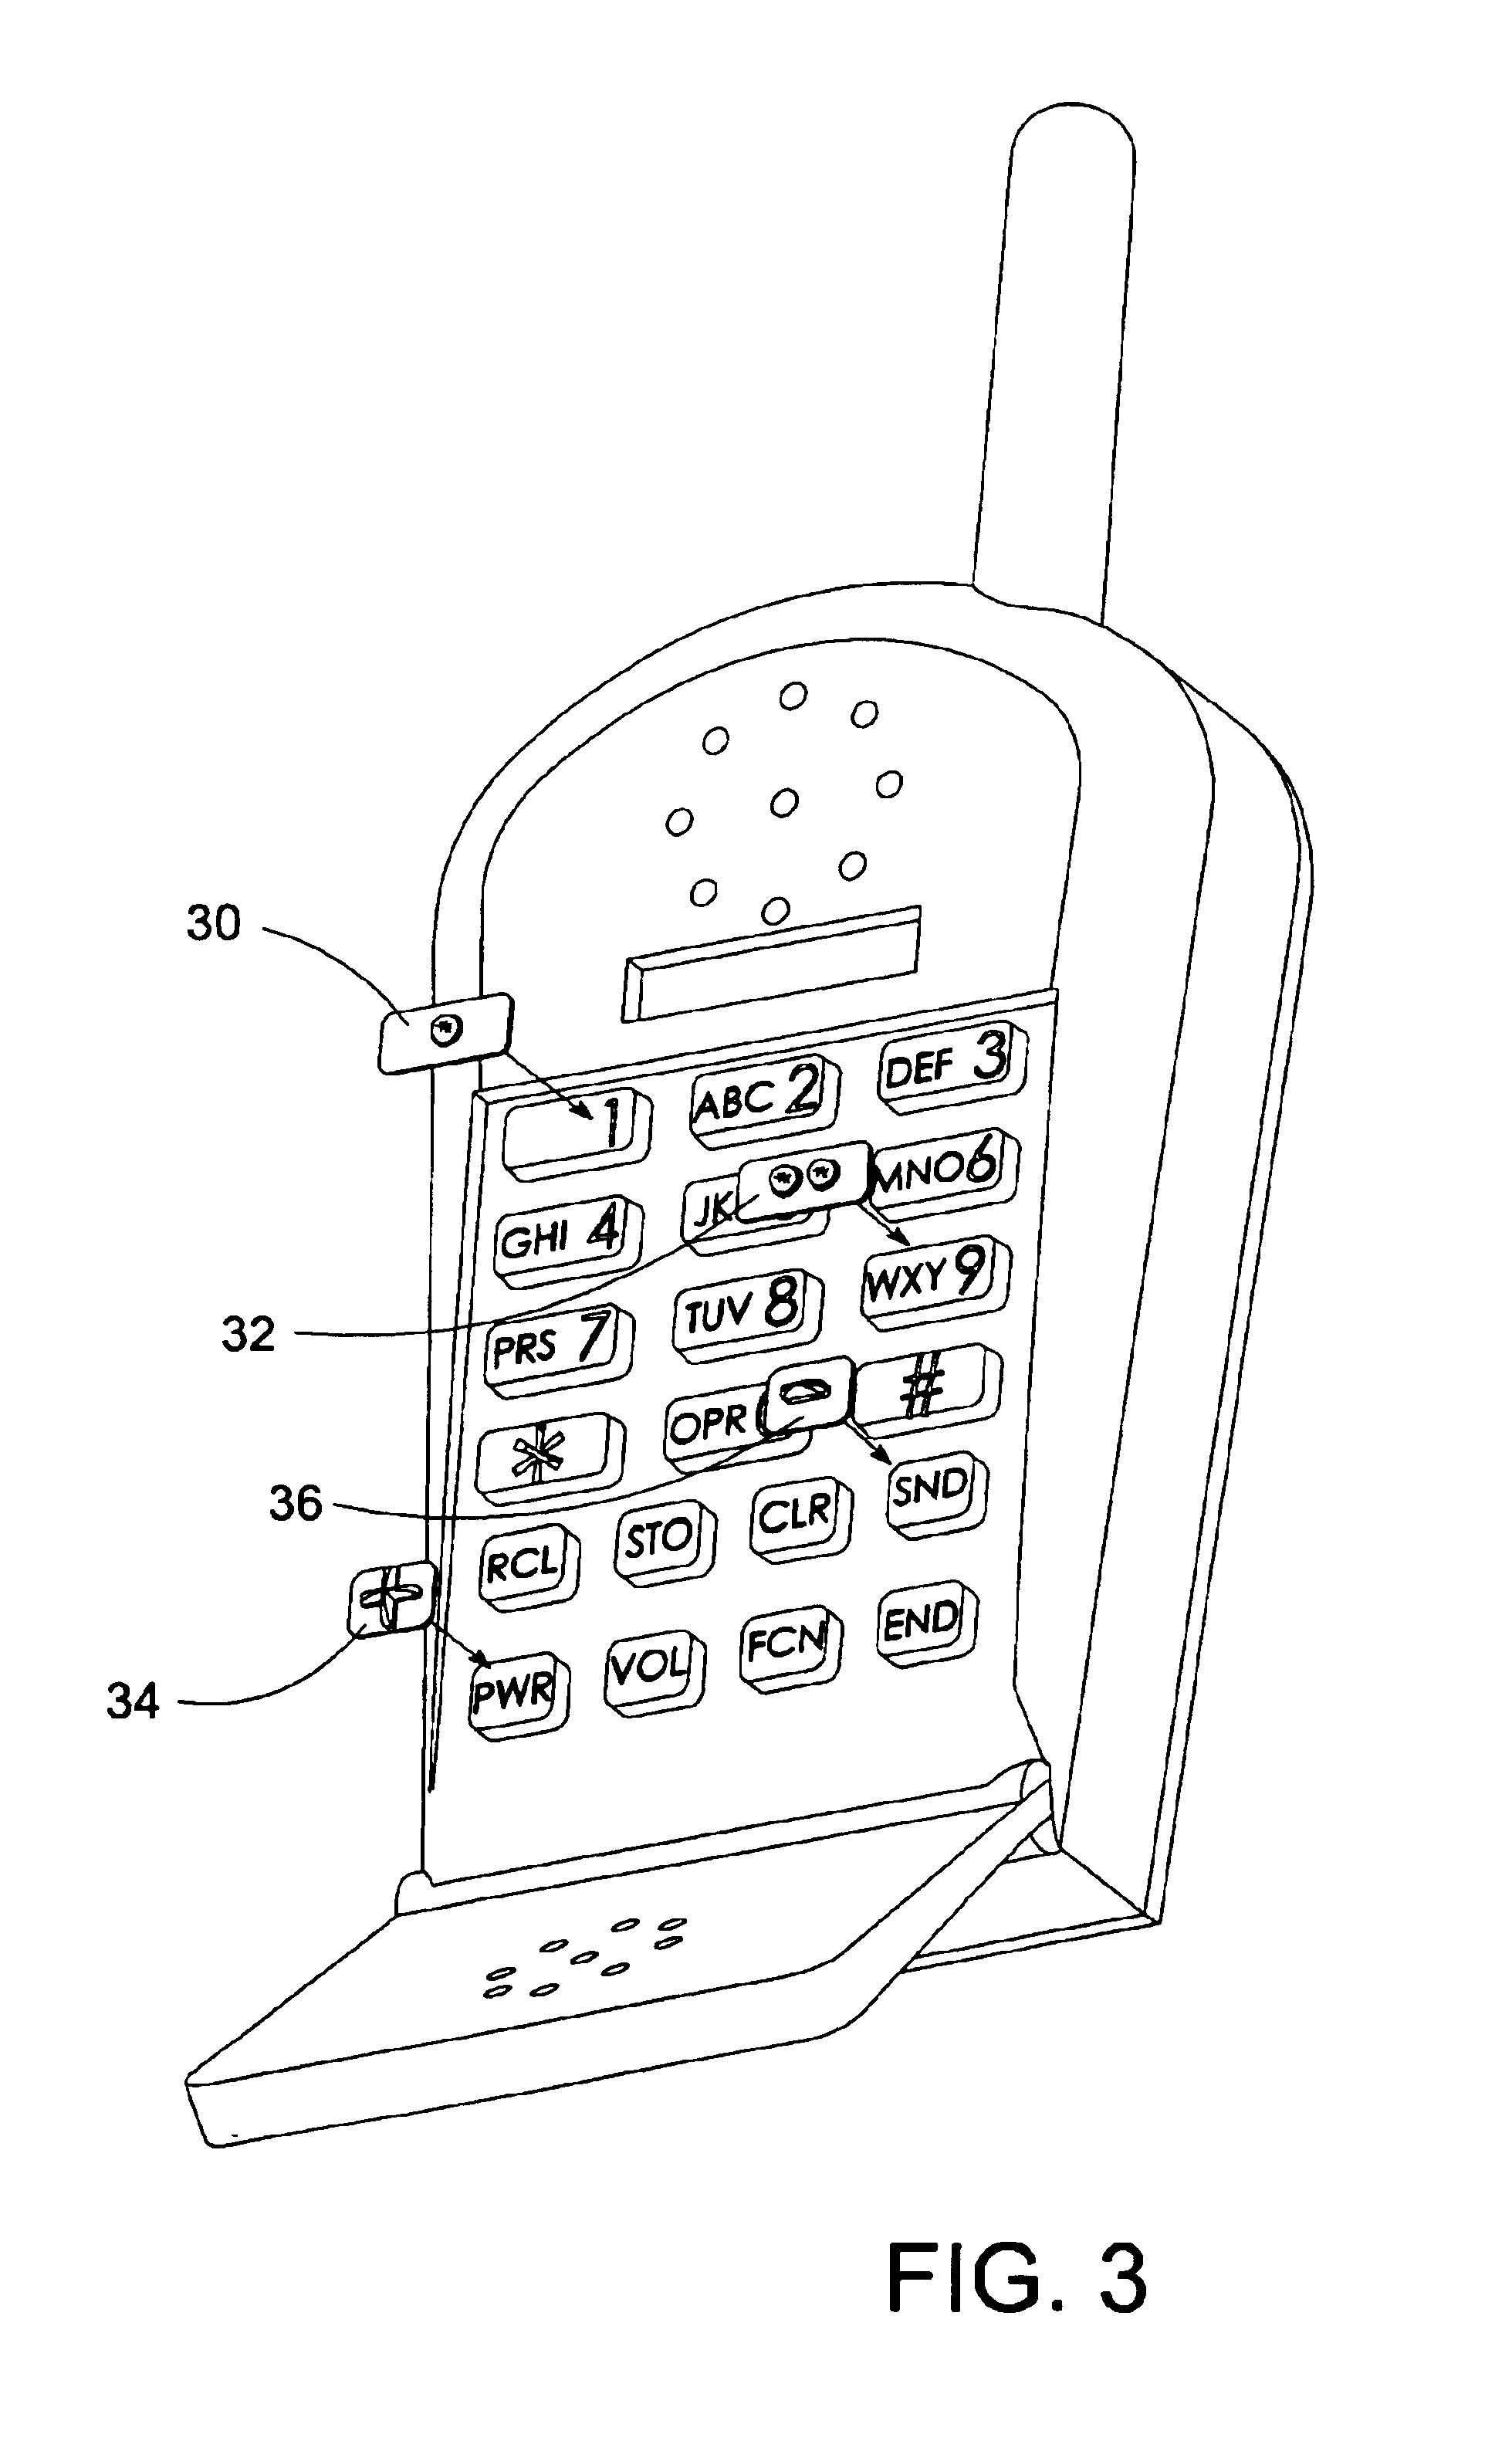 Telephone adapted for emergency dialing by touch